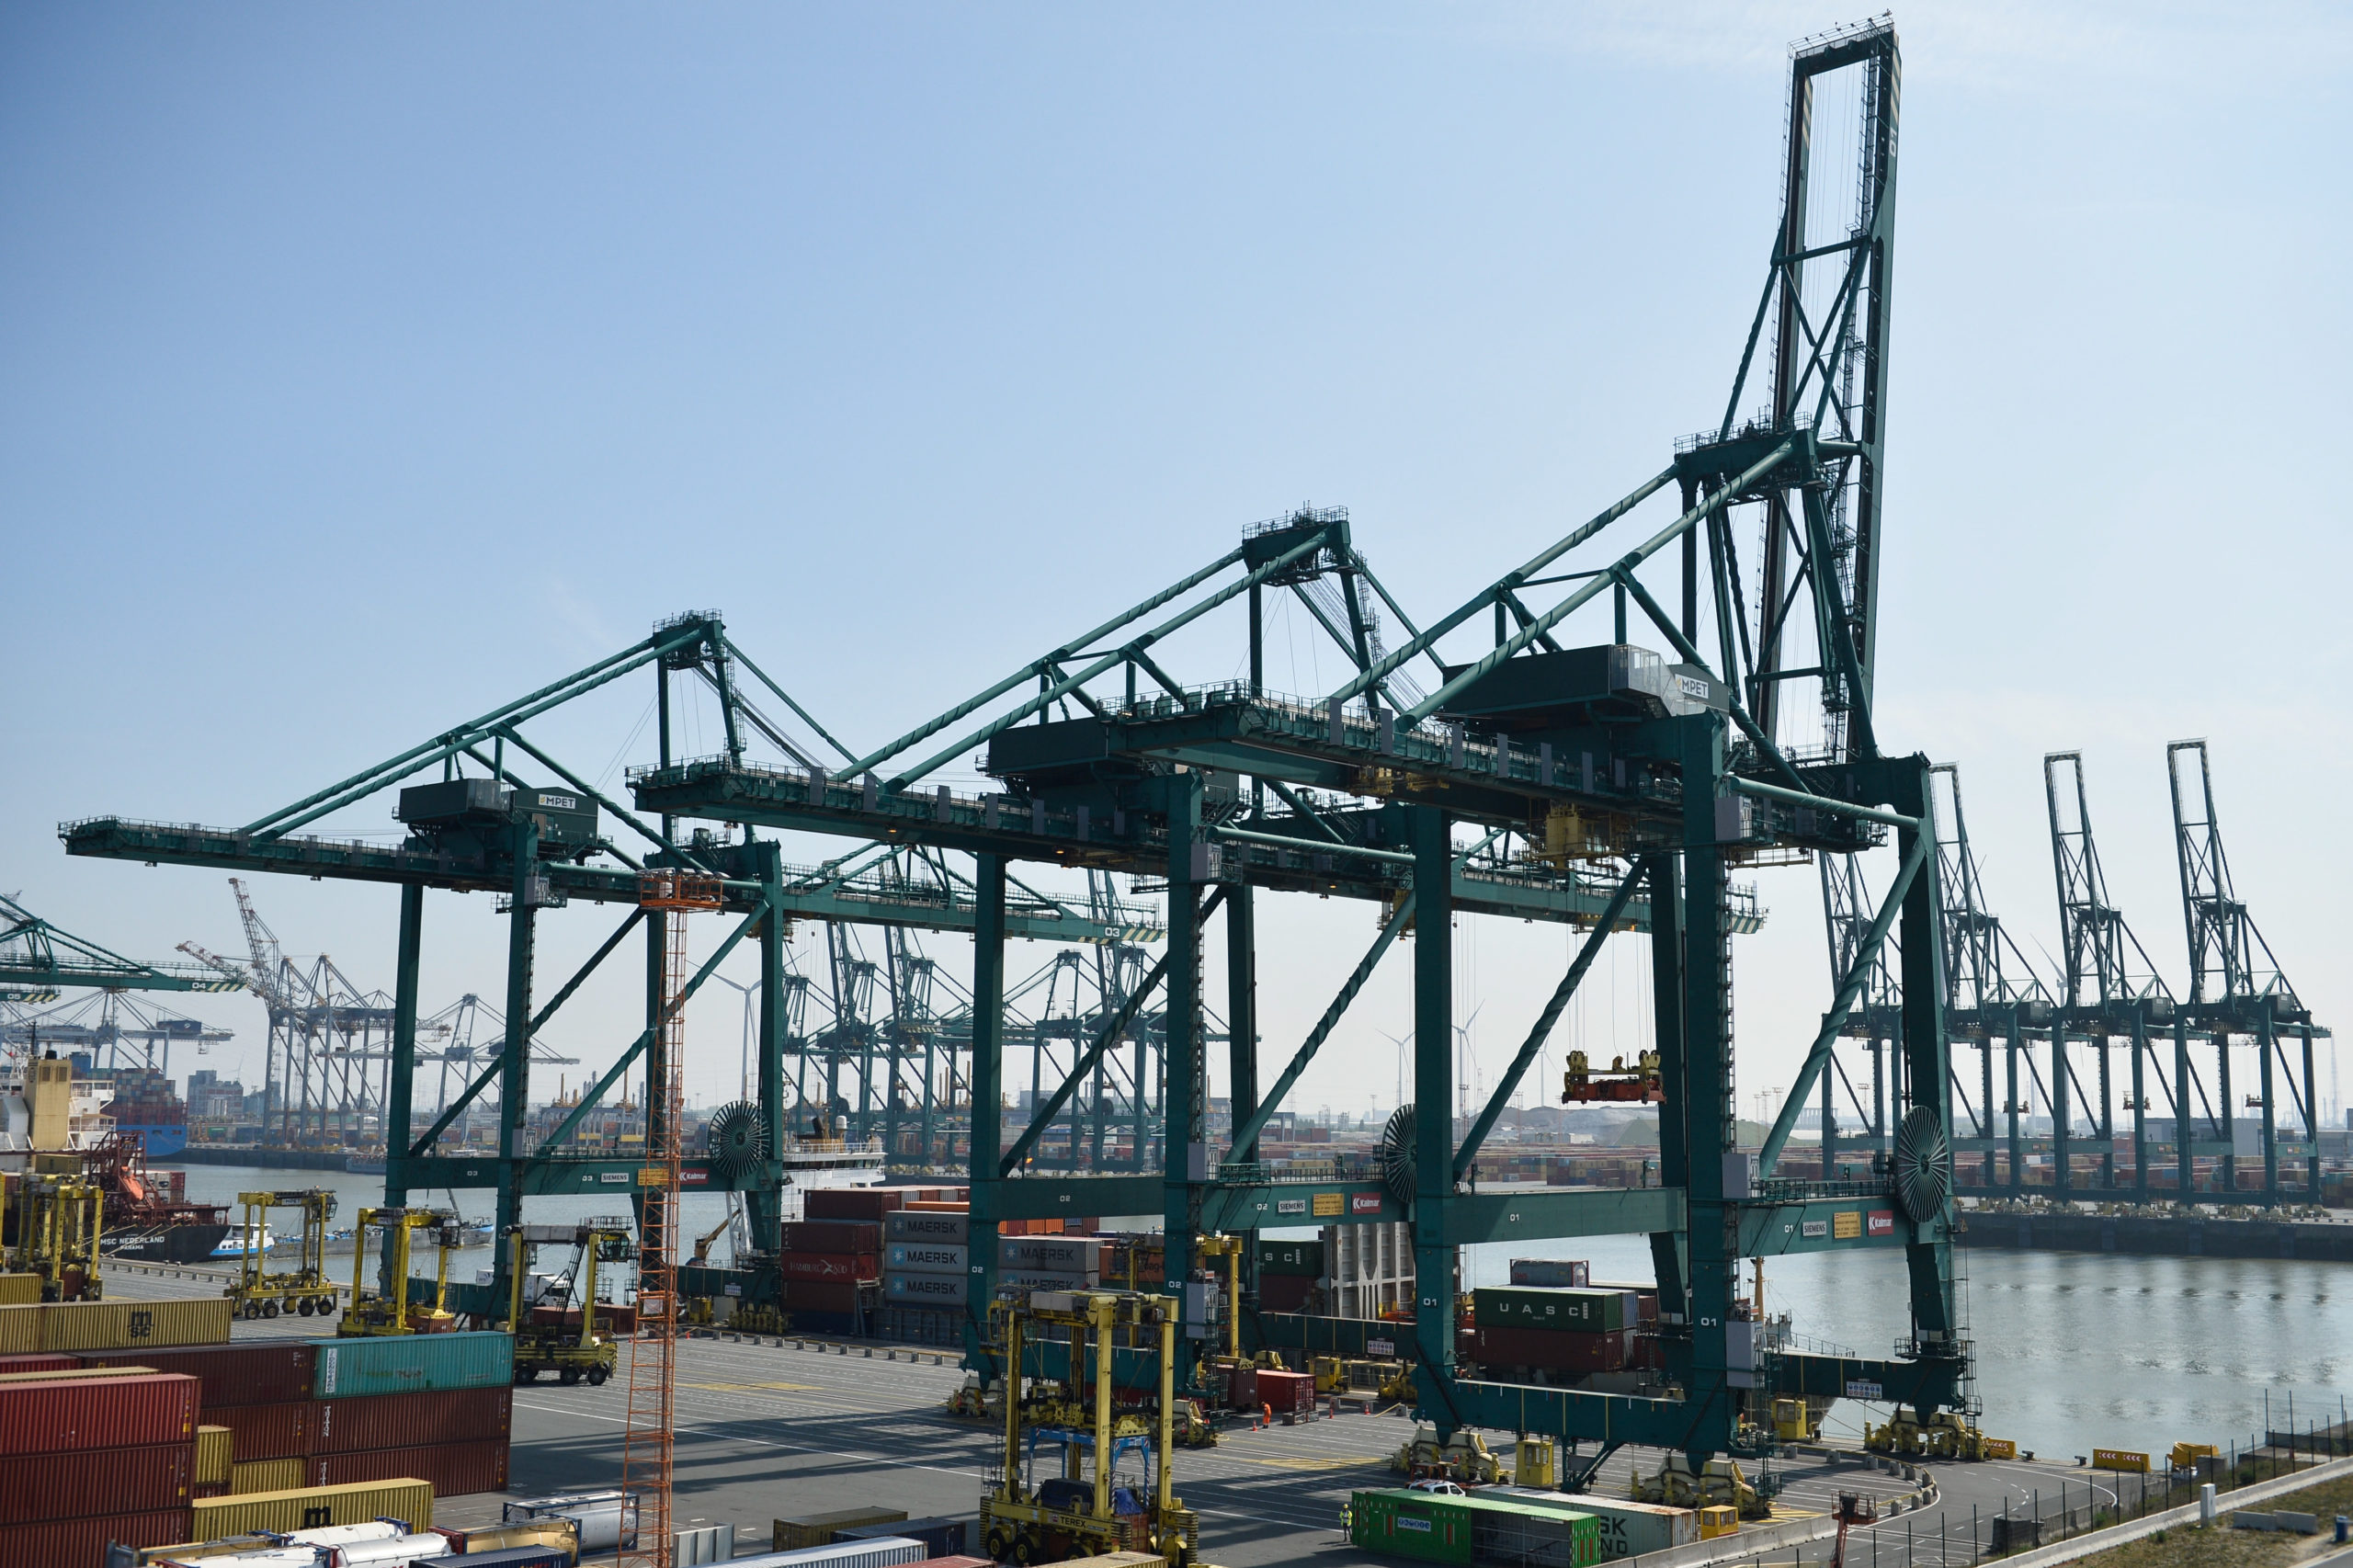 Fusion of Antwerp and Zeebrugge ports becomes imminent